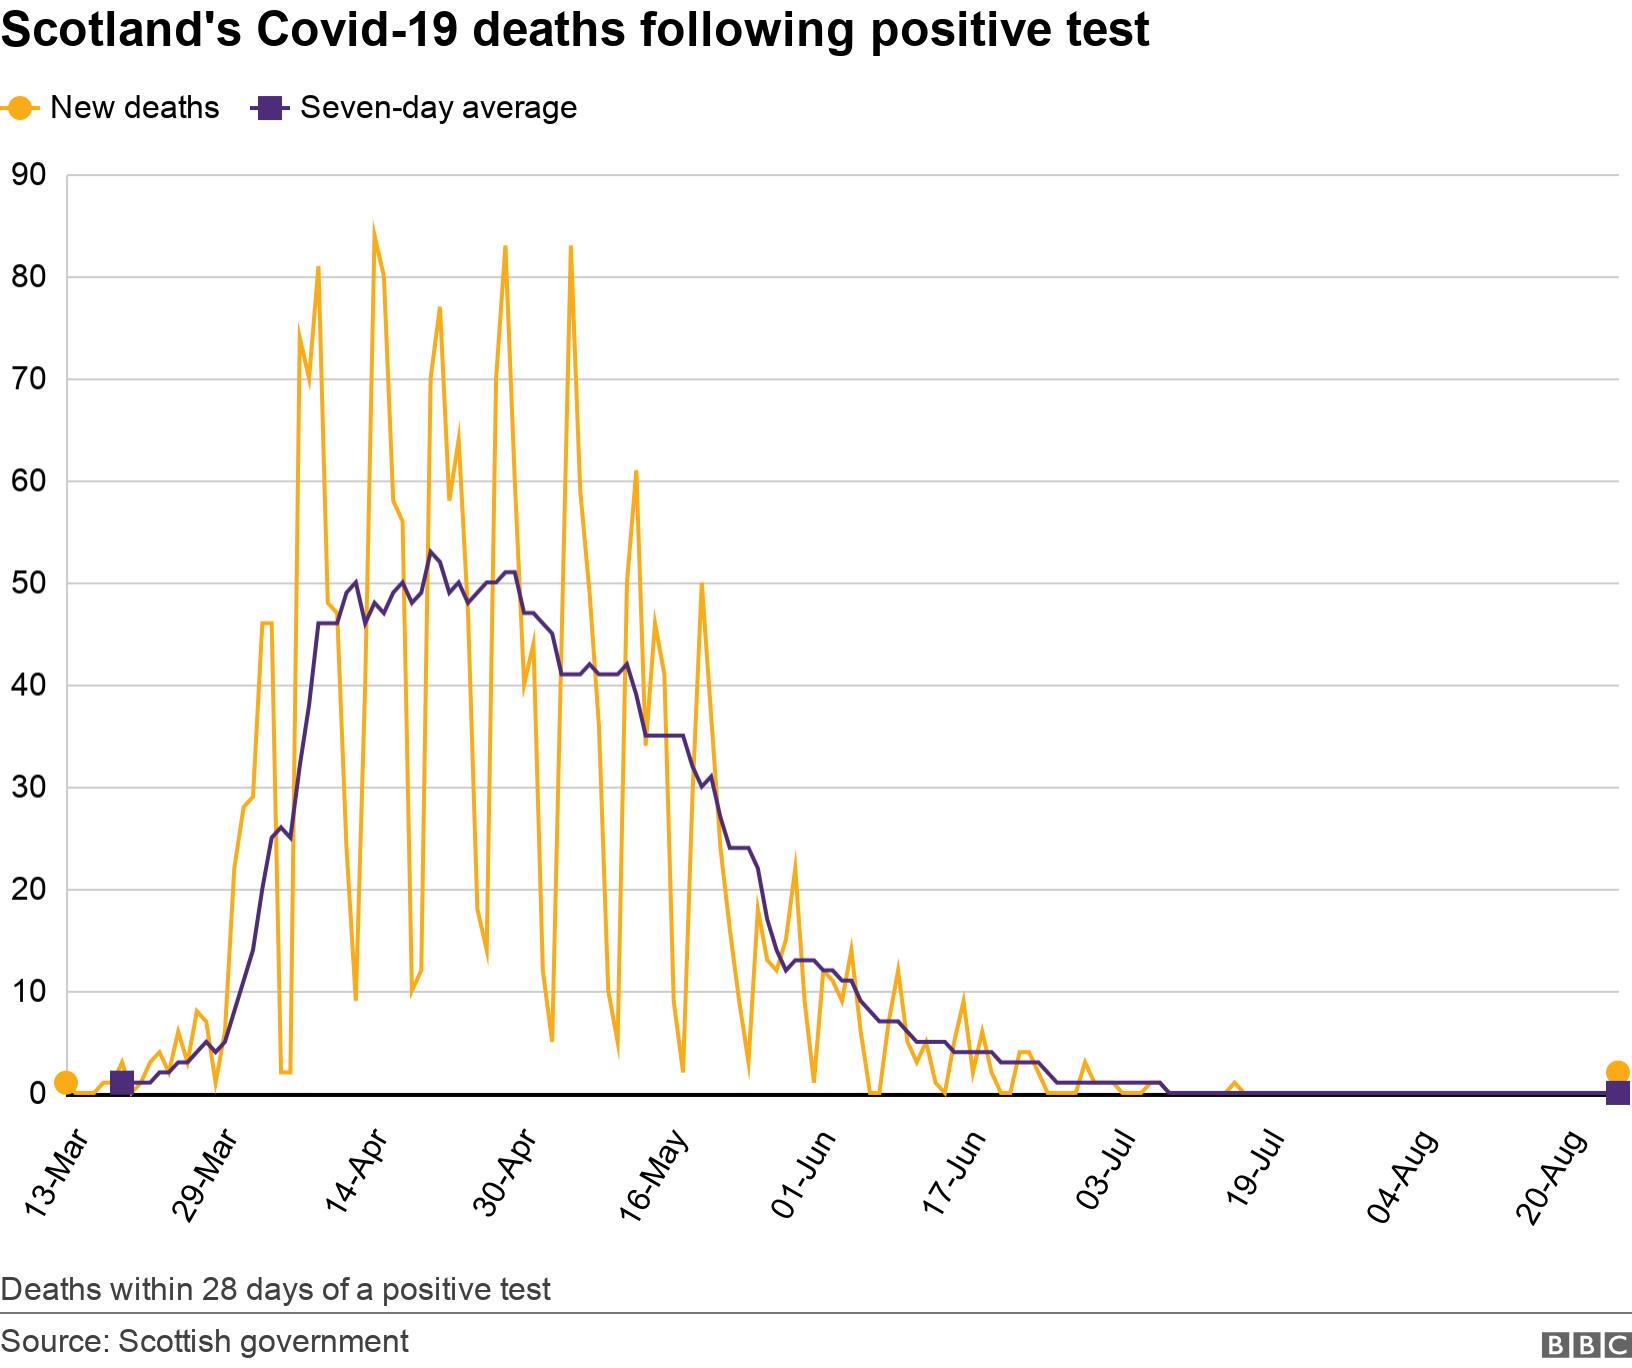 Scotland's Covid-19 deaths following positive test. .  Deaths within 28 days of a positive test.